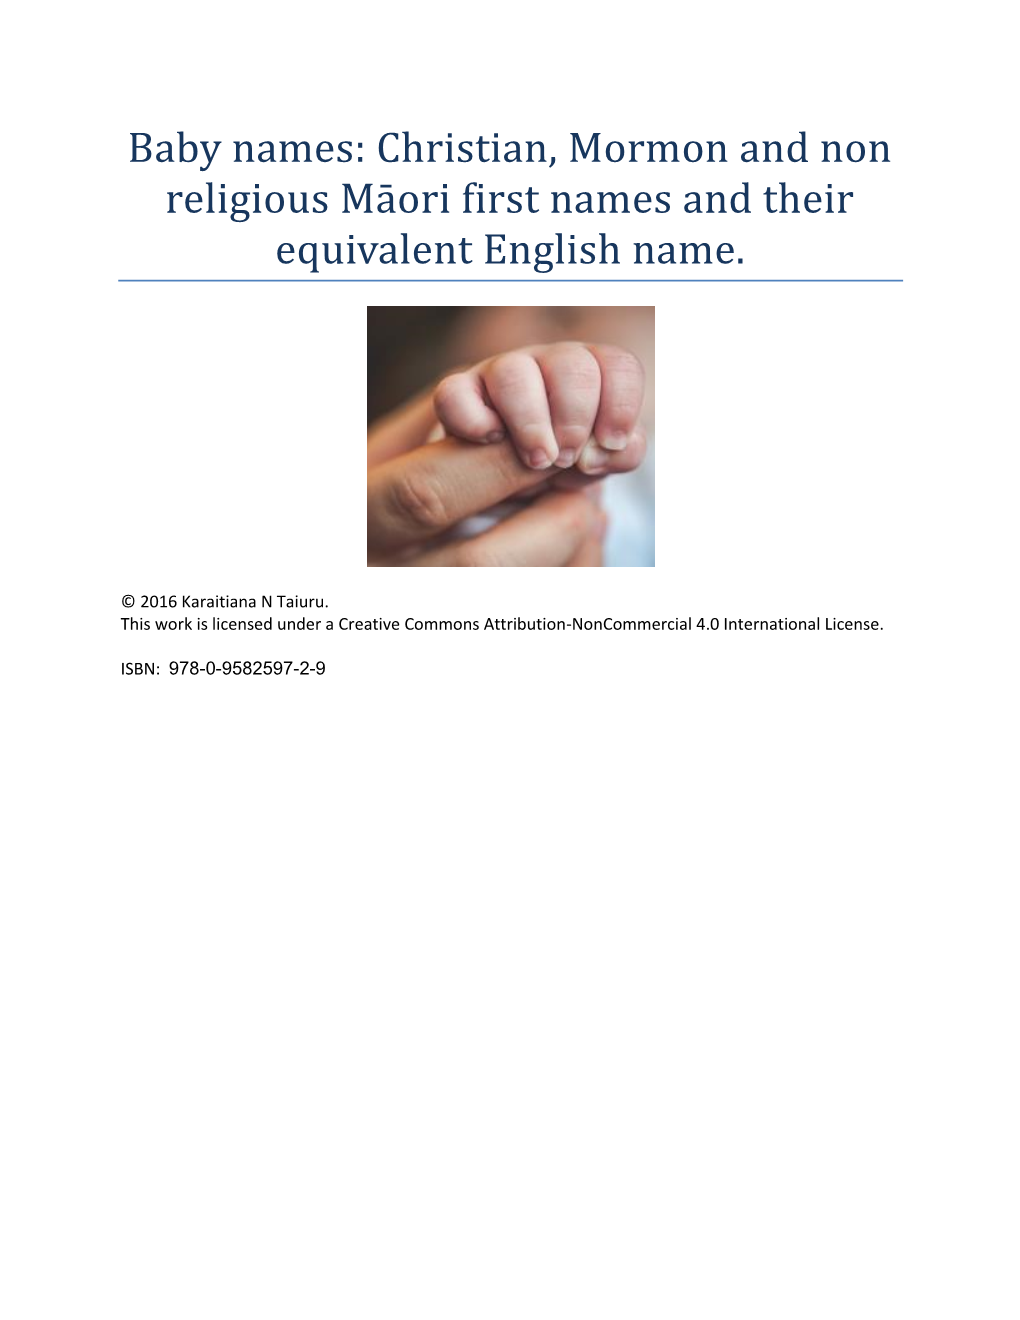 Baby Names: Christian, Mormon and Non Religious Māori First Names and Their Equivalent English Name